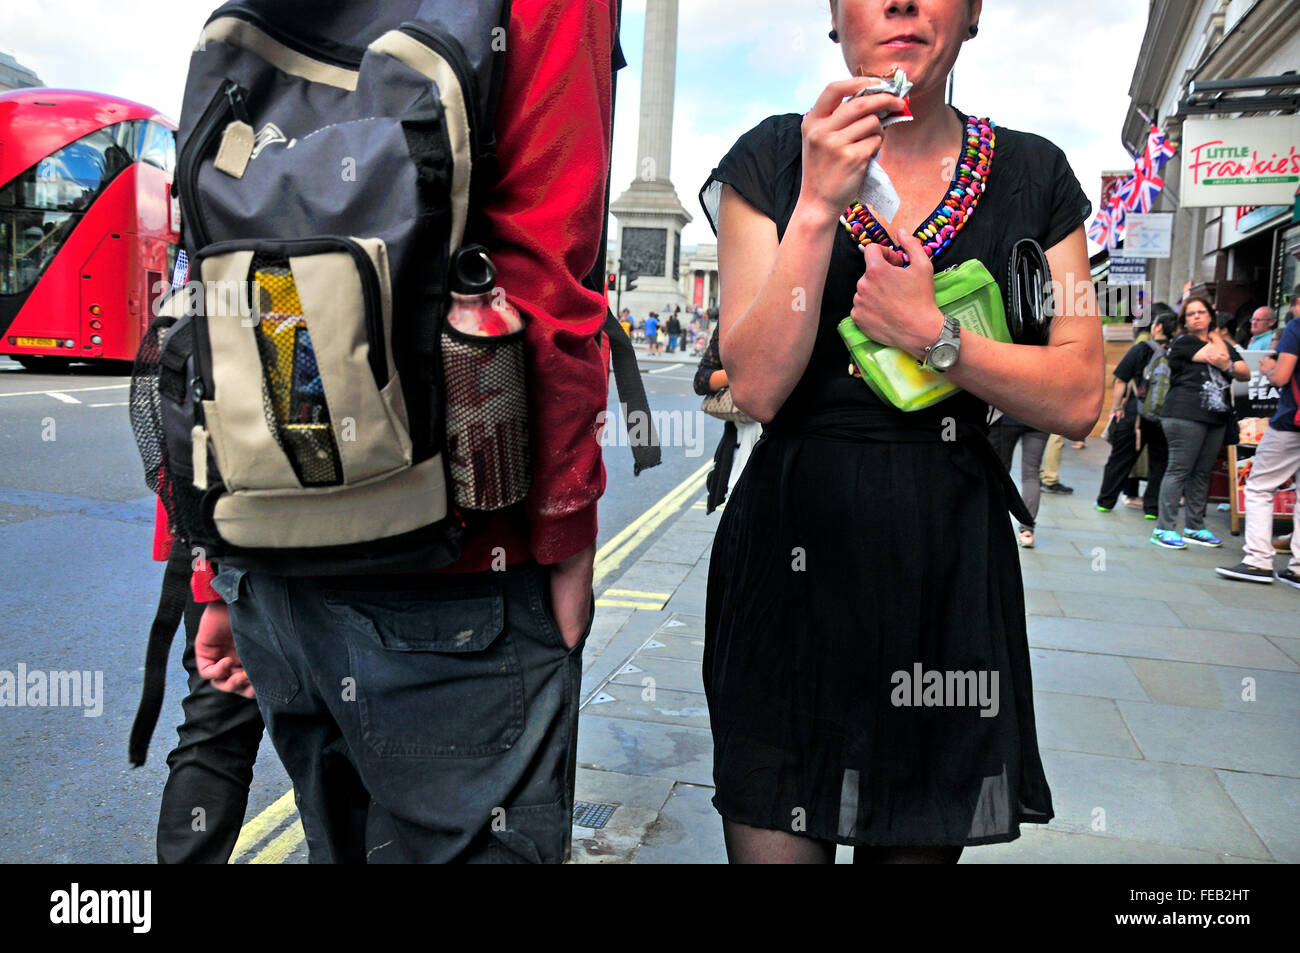 London, England, UK. Woman eating a snack in Whitehall Stock Photo